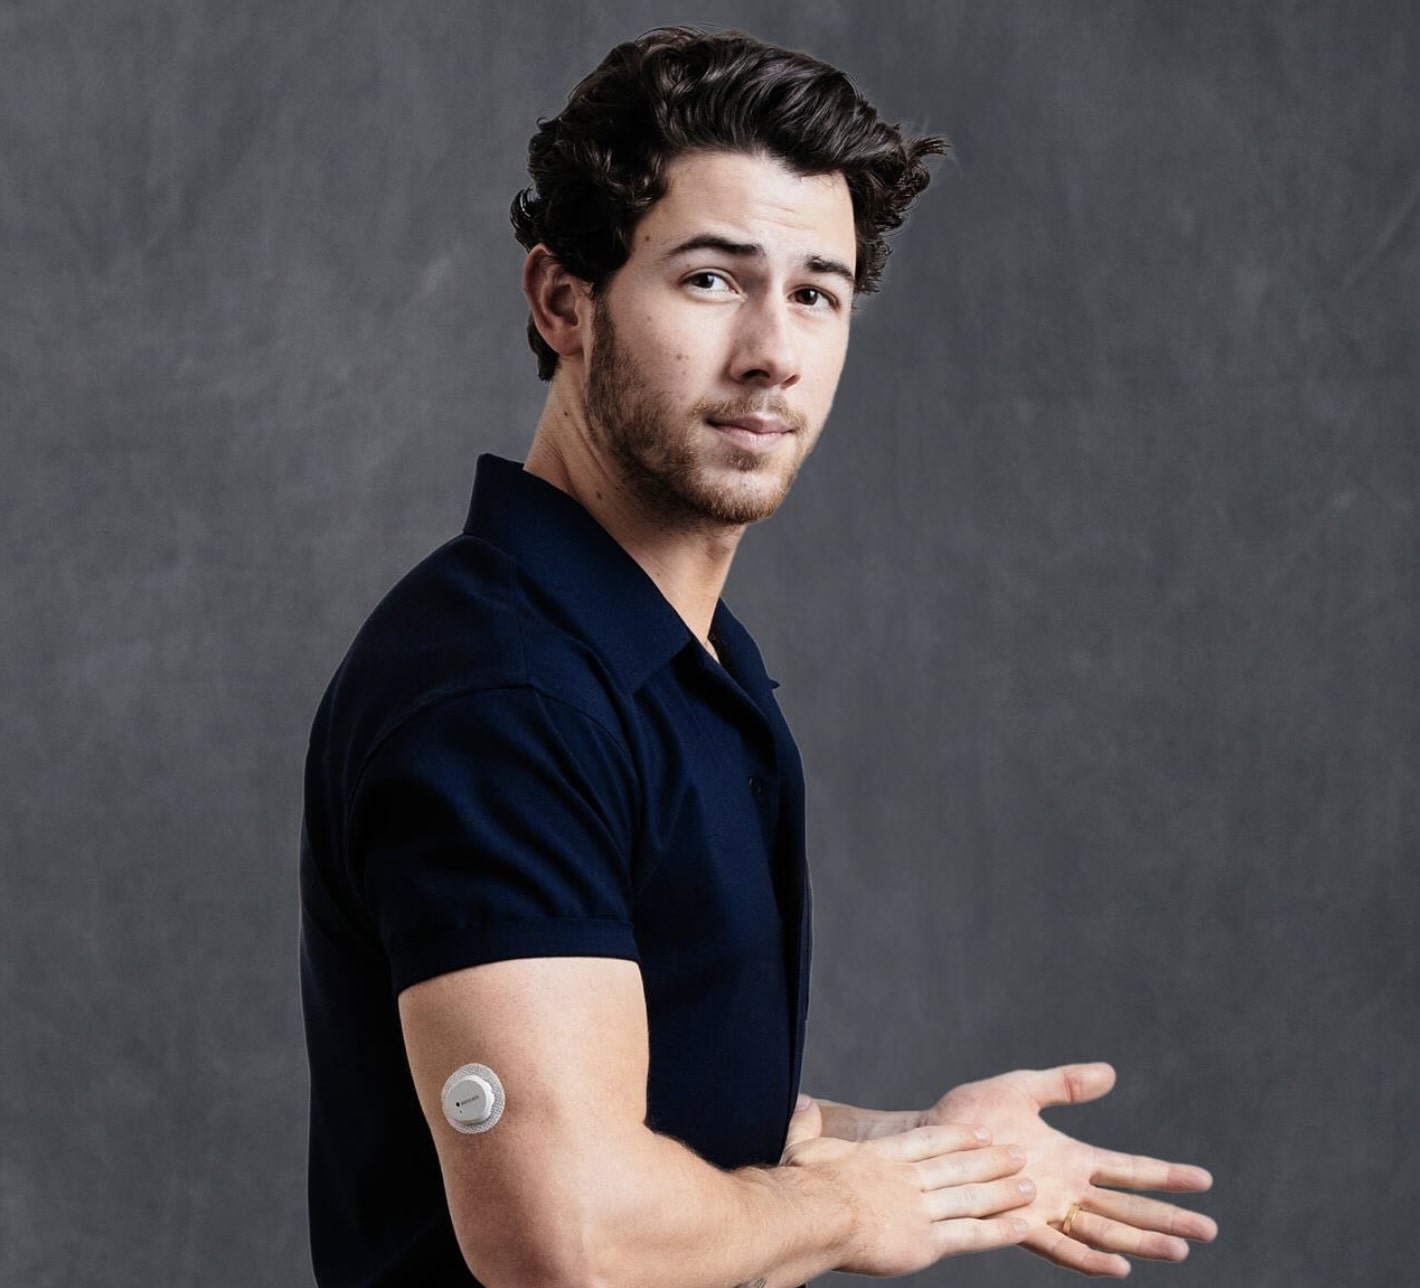 nick-jonas’-family-‘saved-his-life’-by-noticing-his-type-1-diabetes